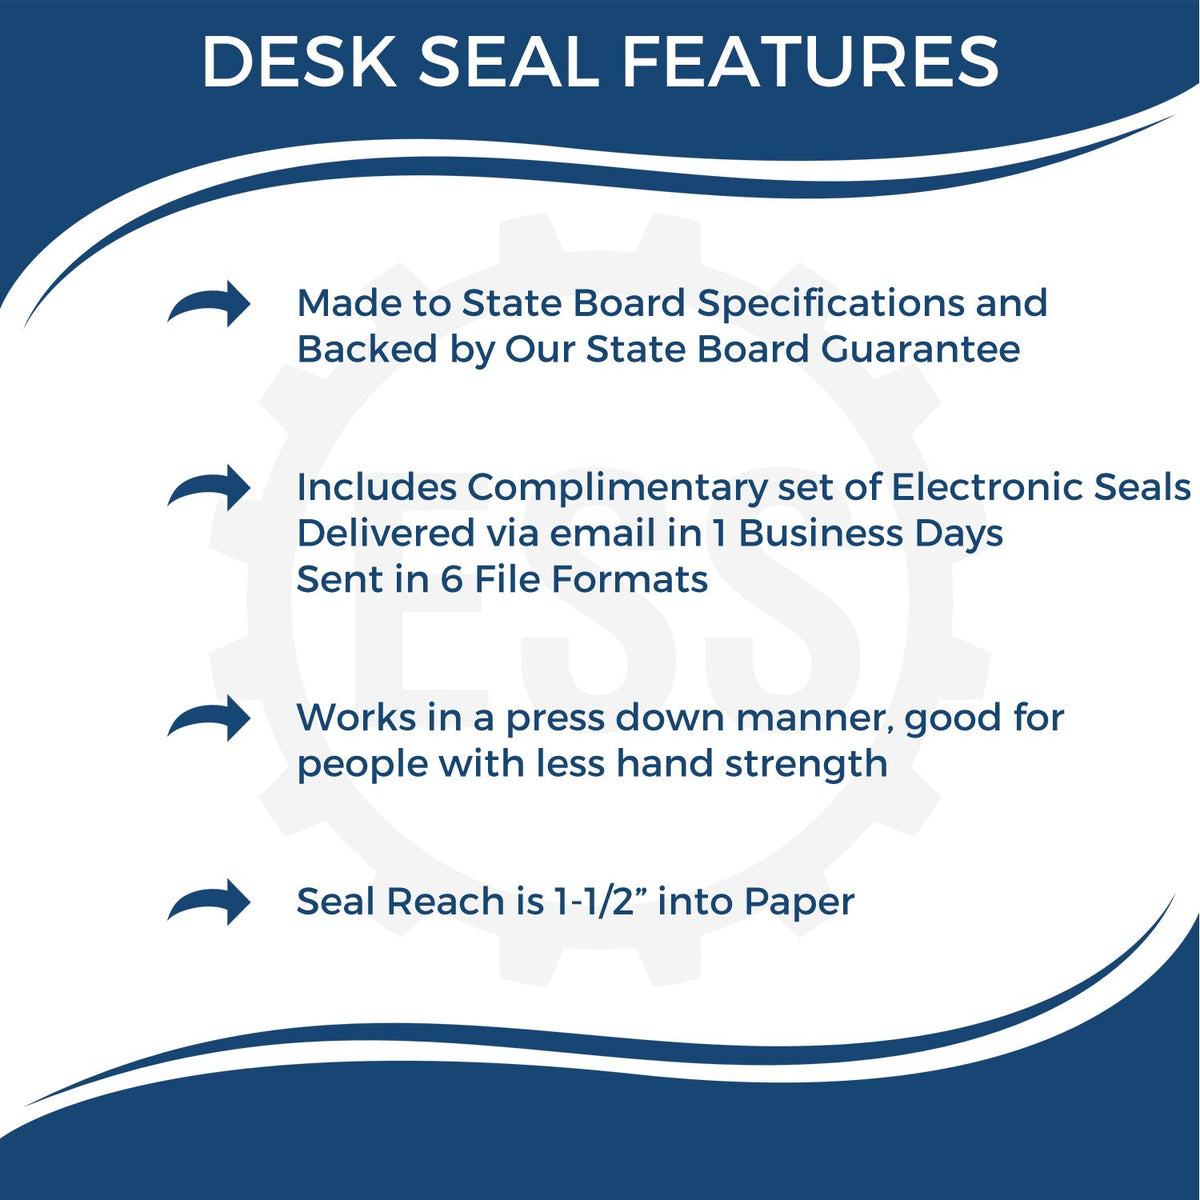 A picture of an infographic highlighting the selling points for the Pennsylvania Engineer Desk Seal